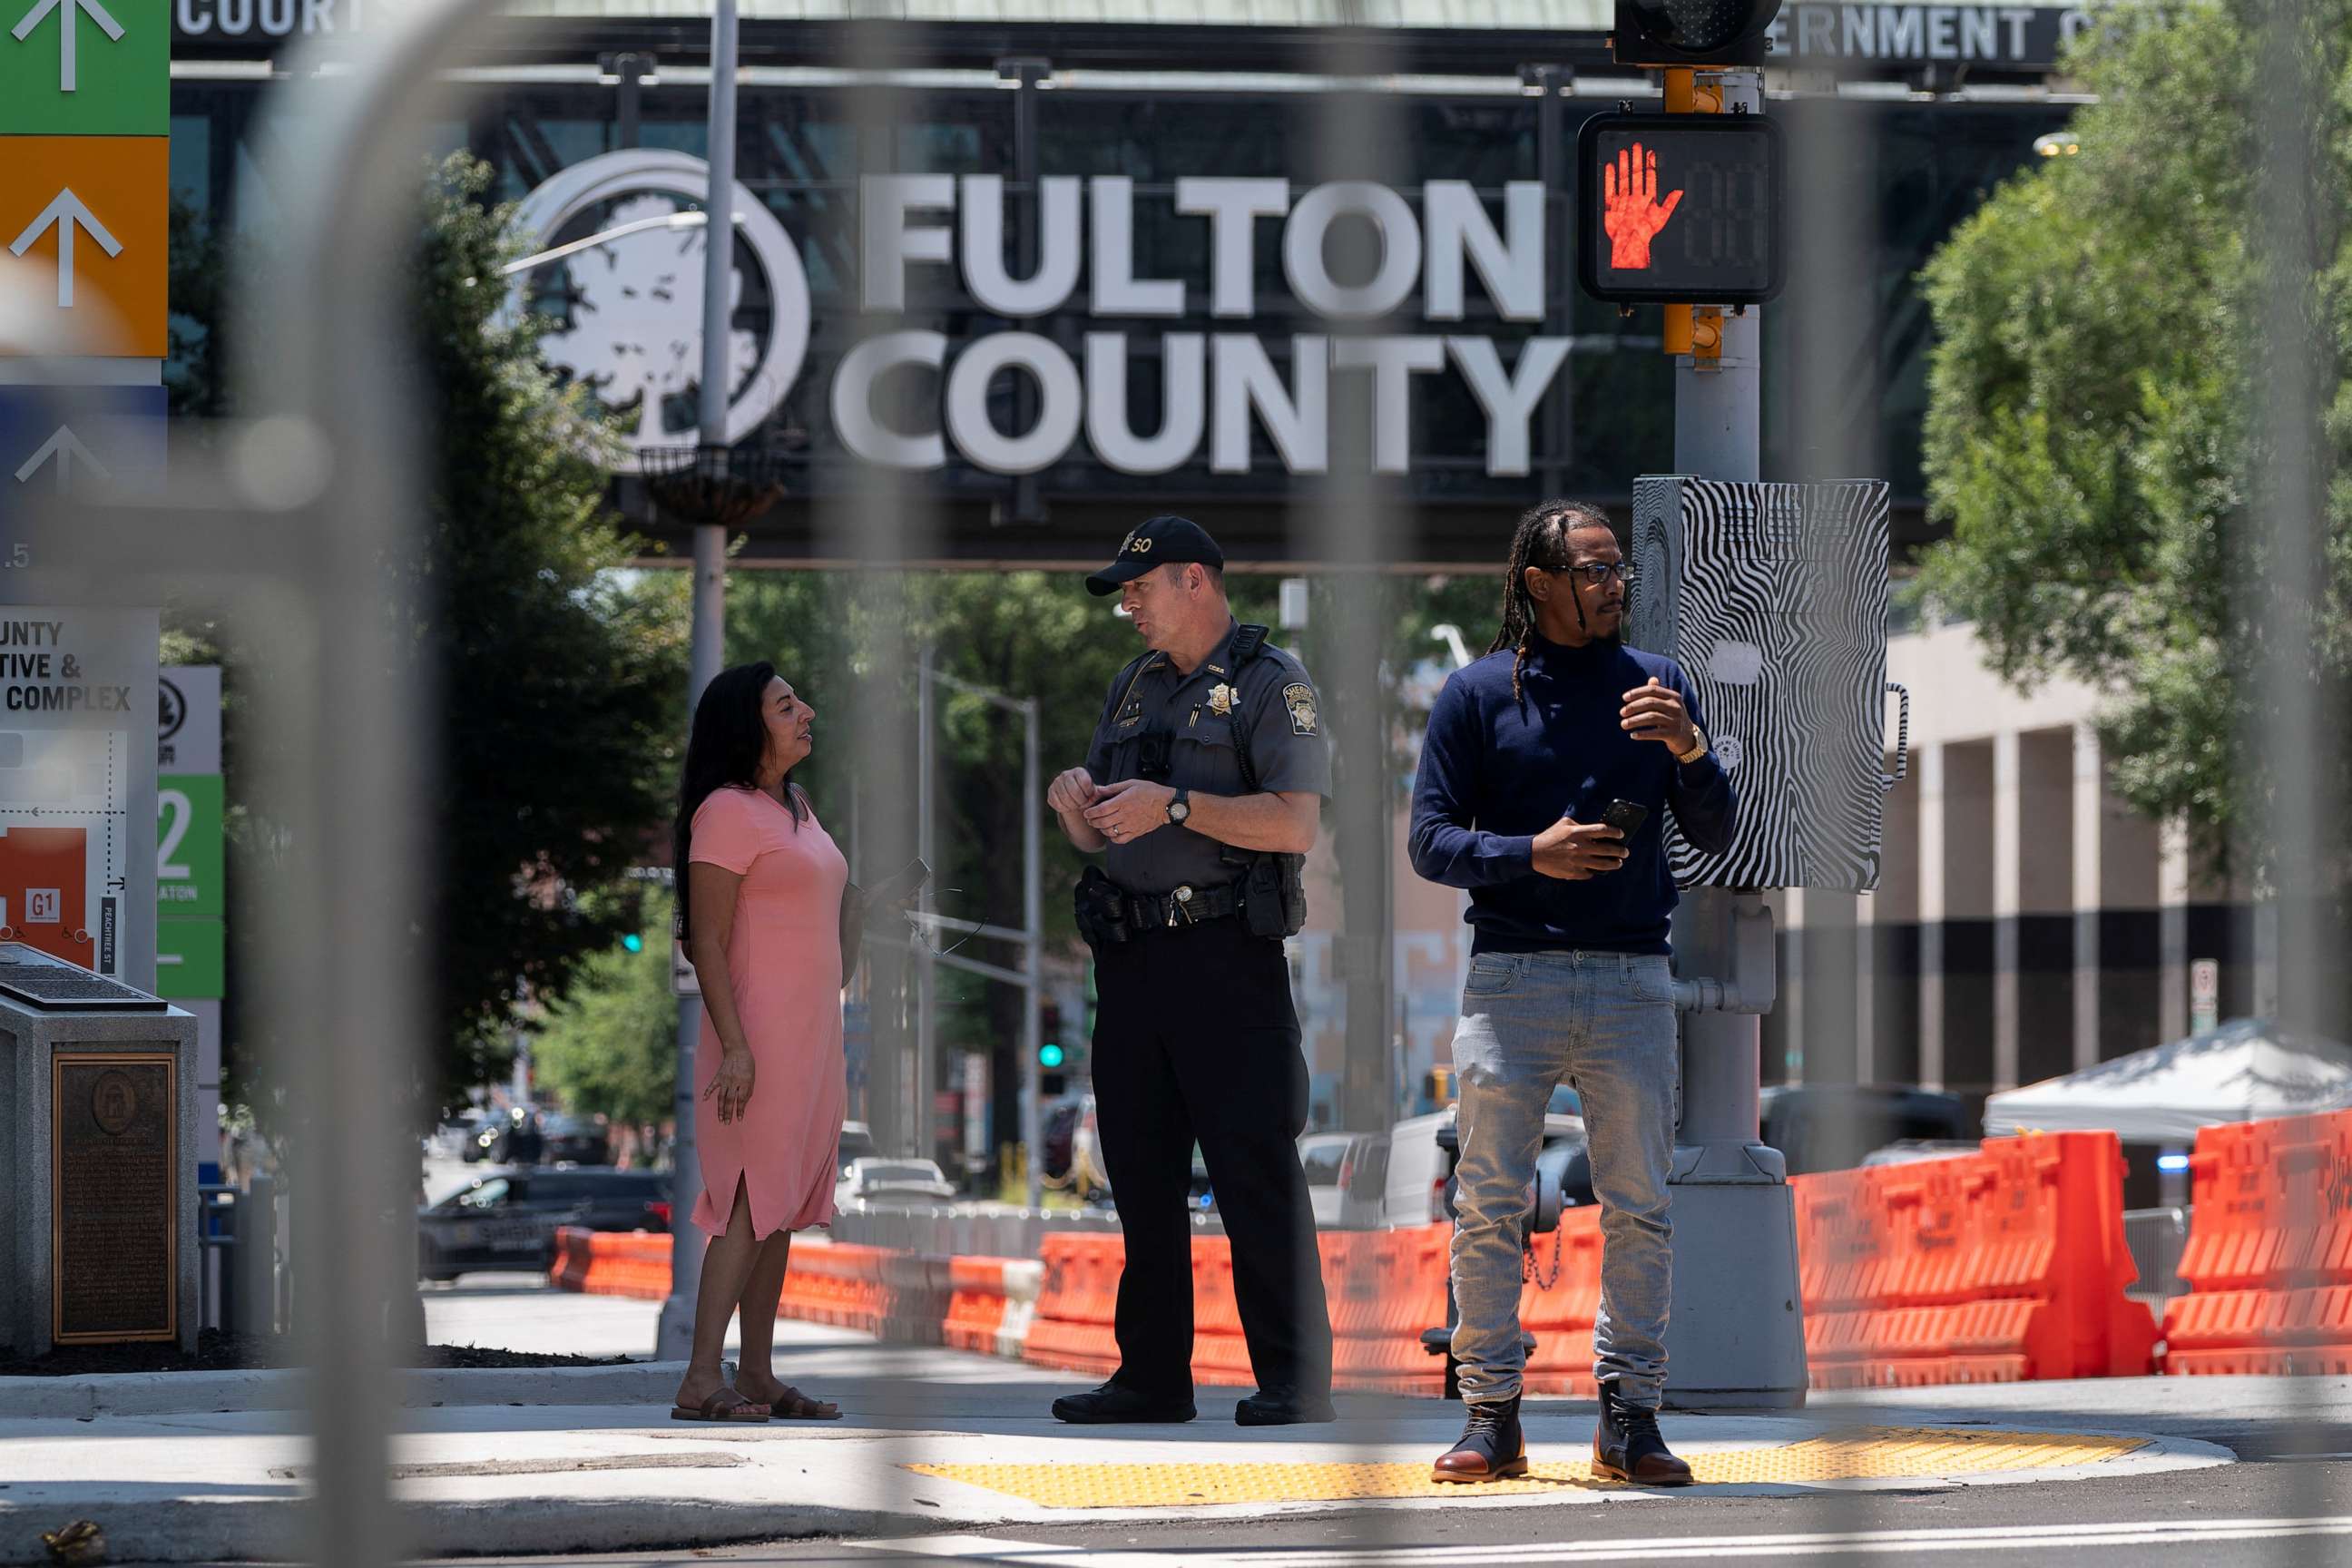 PHOTO: A Sheriff's deputy stands outside after the Fulton County Sheriff ordered roads to be closed as officials tighten security around the Lewis R. Slaton Courthouse, in Atlanta, Georgia, U.S. August 7, 2023.